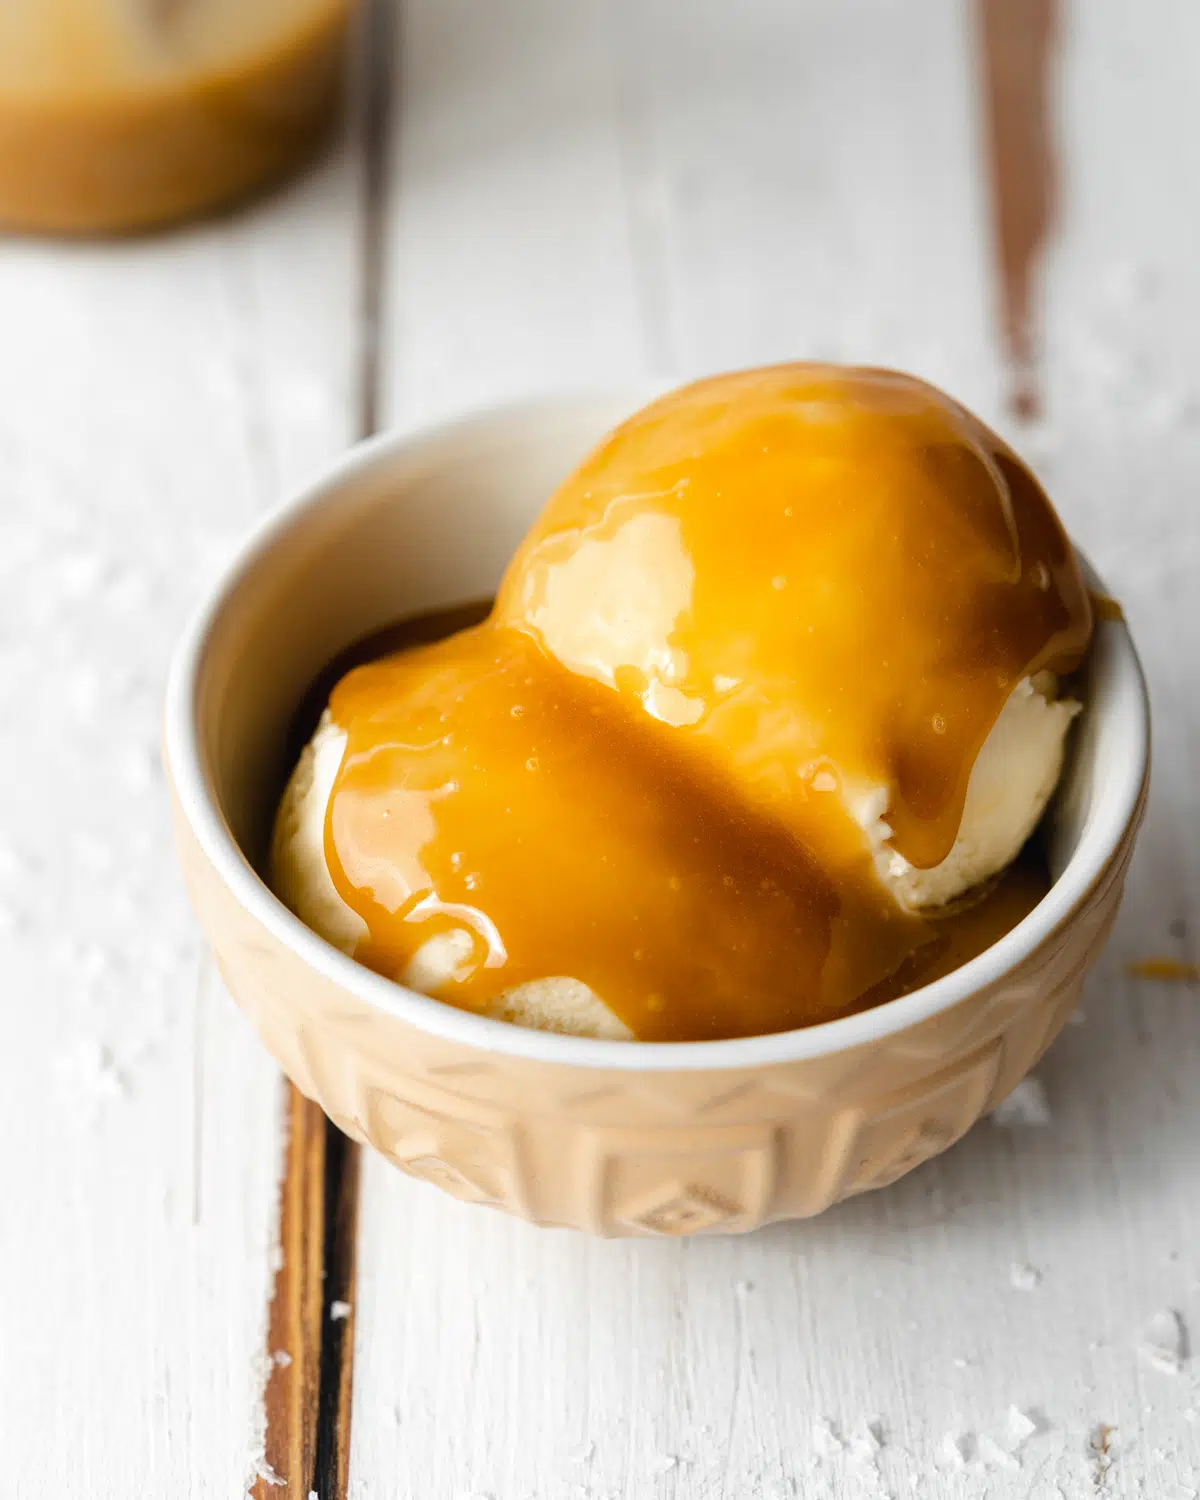 small bowl with two scoops of ice cream covered in homemade caramel sauce, on a white wooden surface.